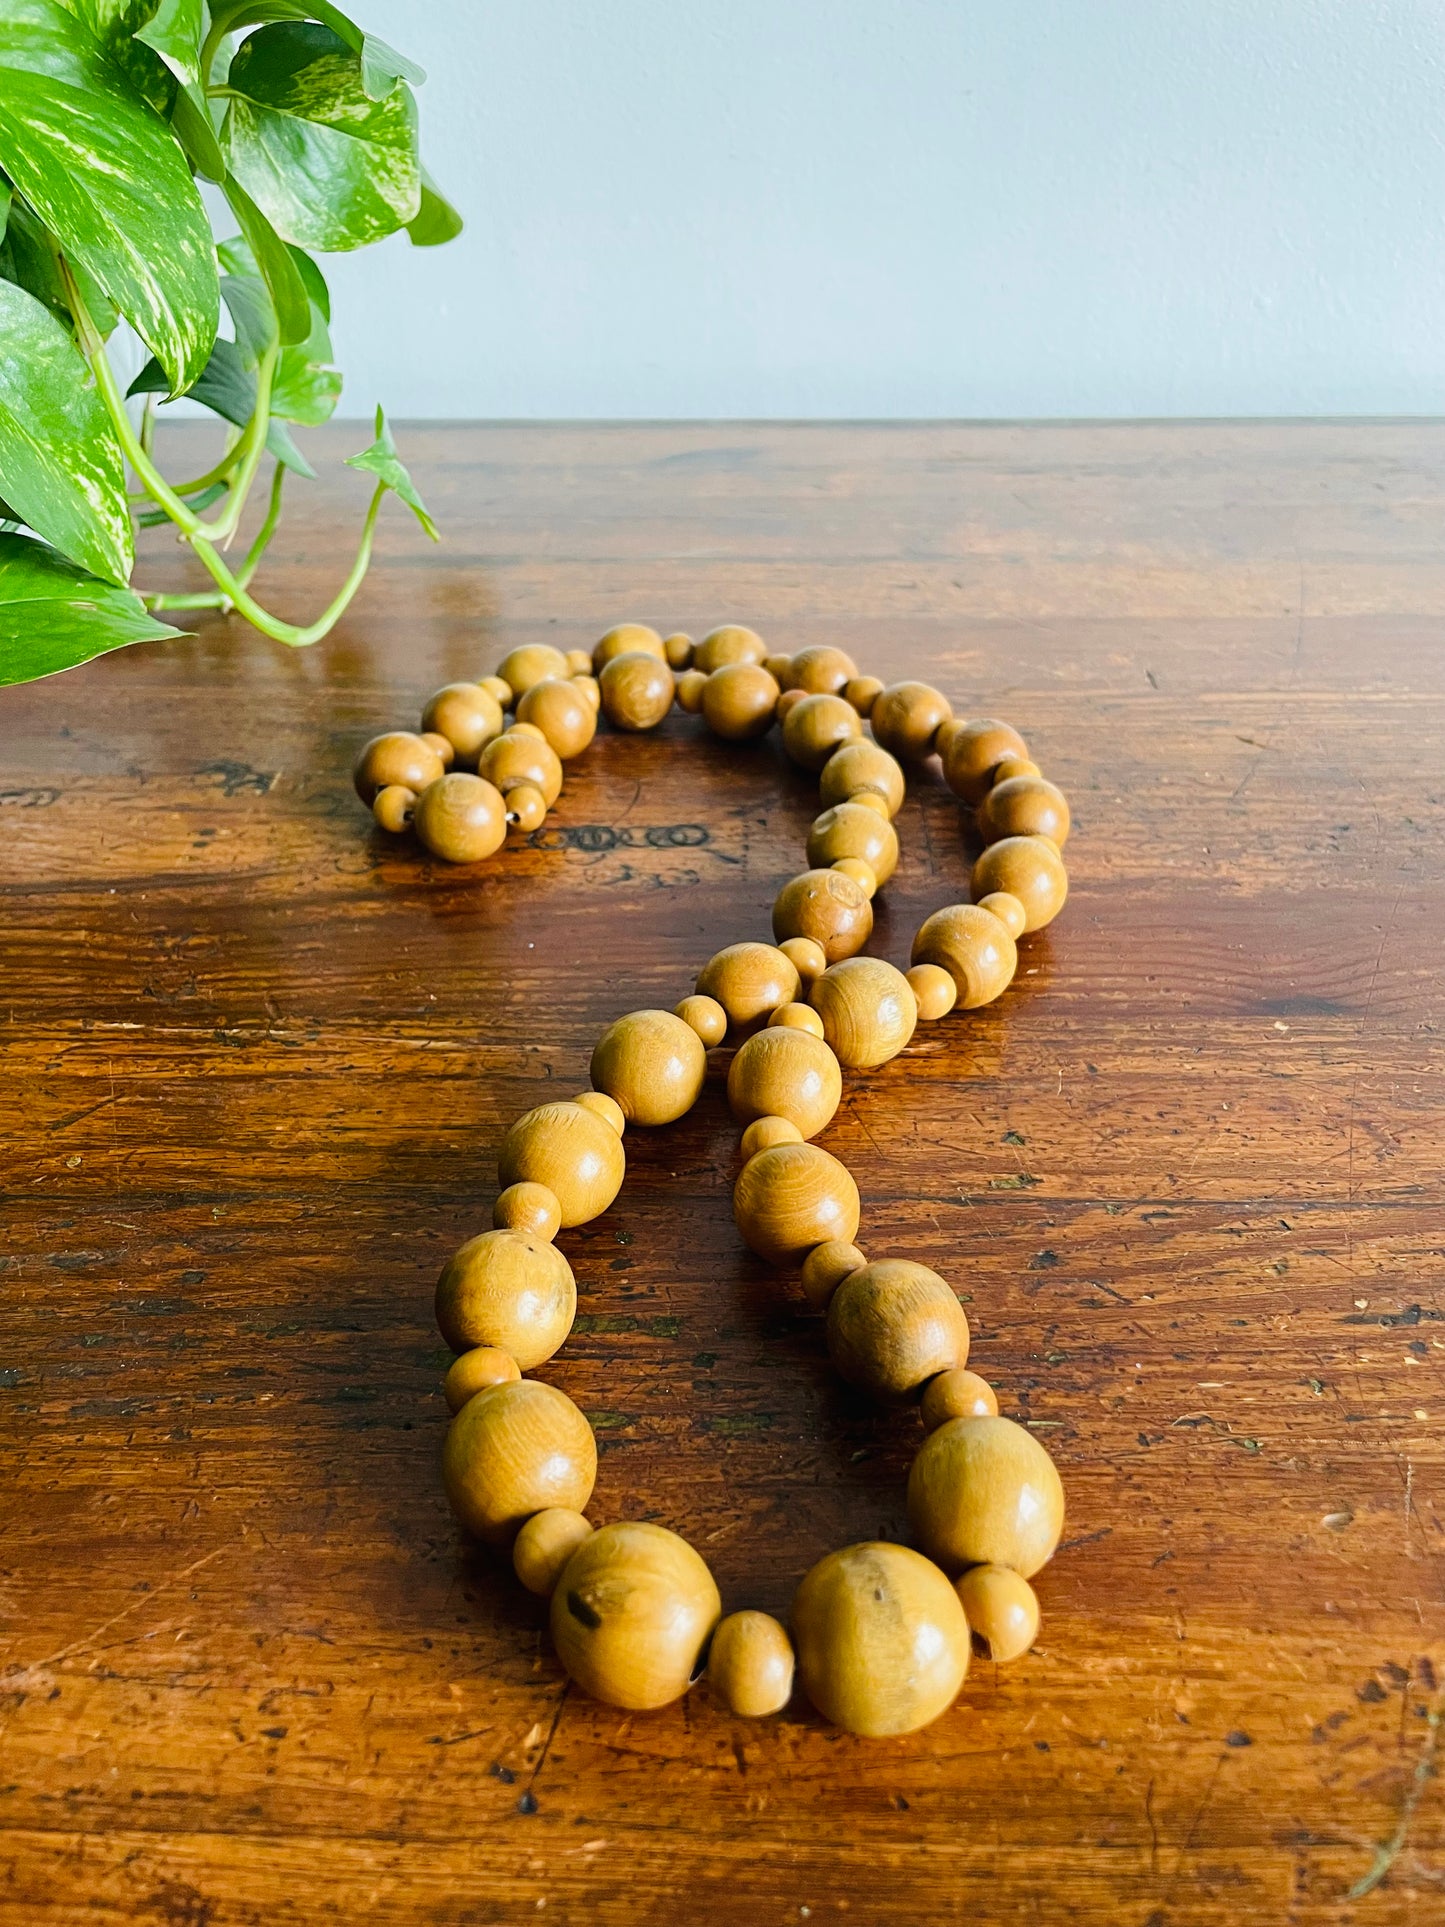 Solid Wood Beads on Rope - Necklace or Decor Piece